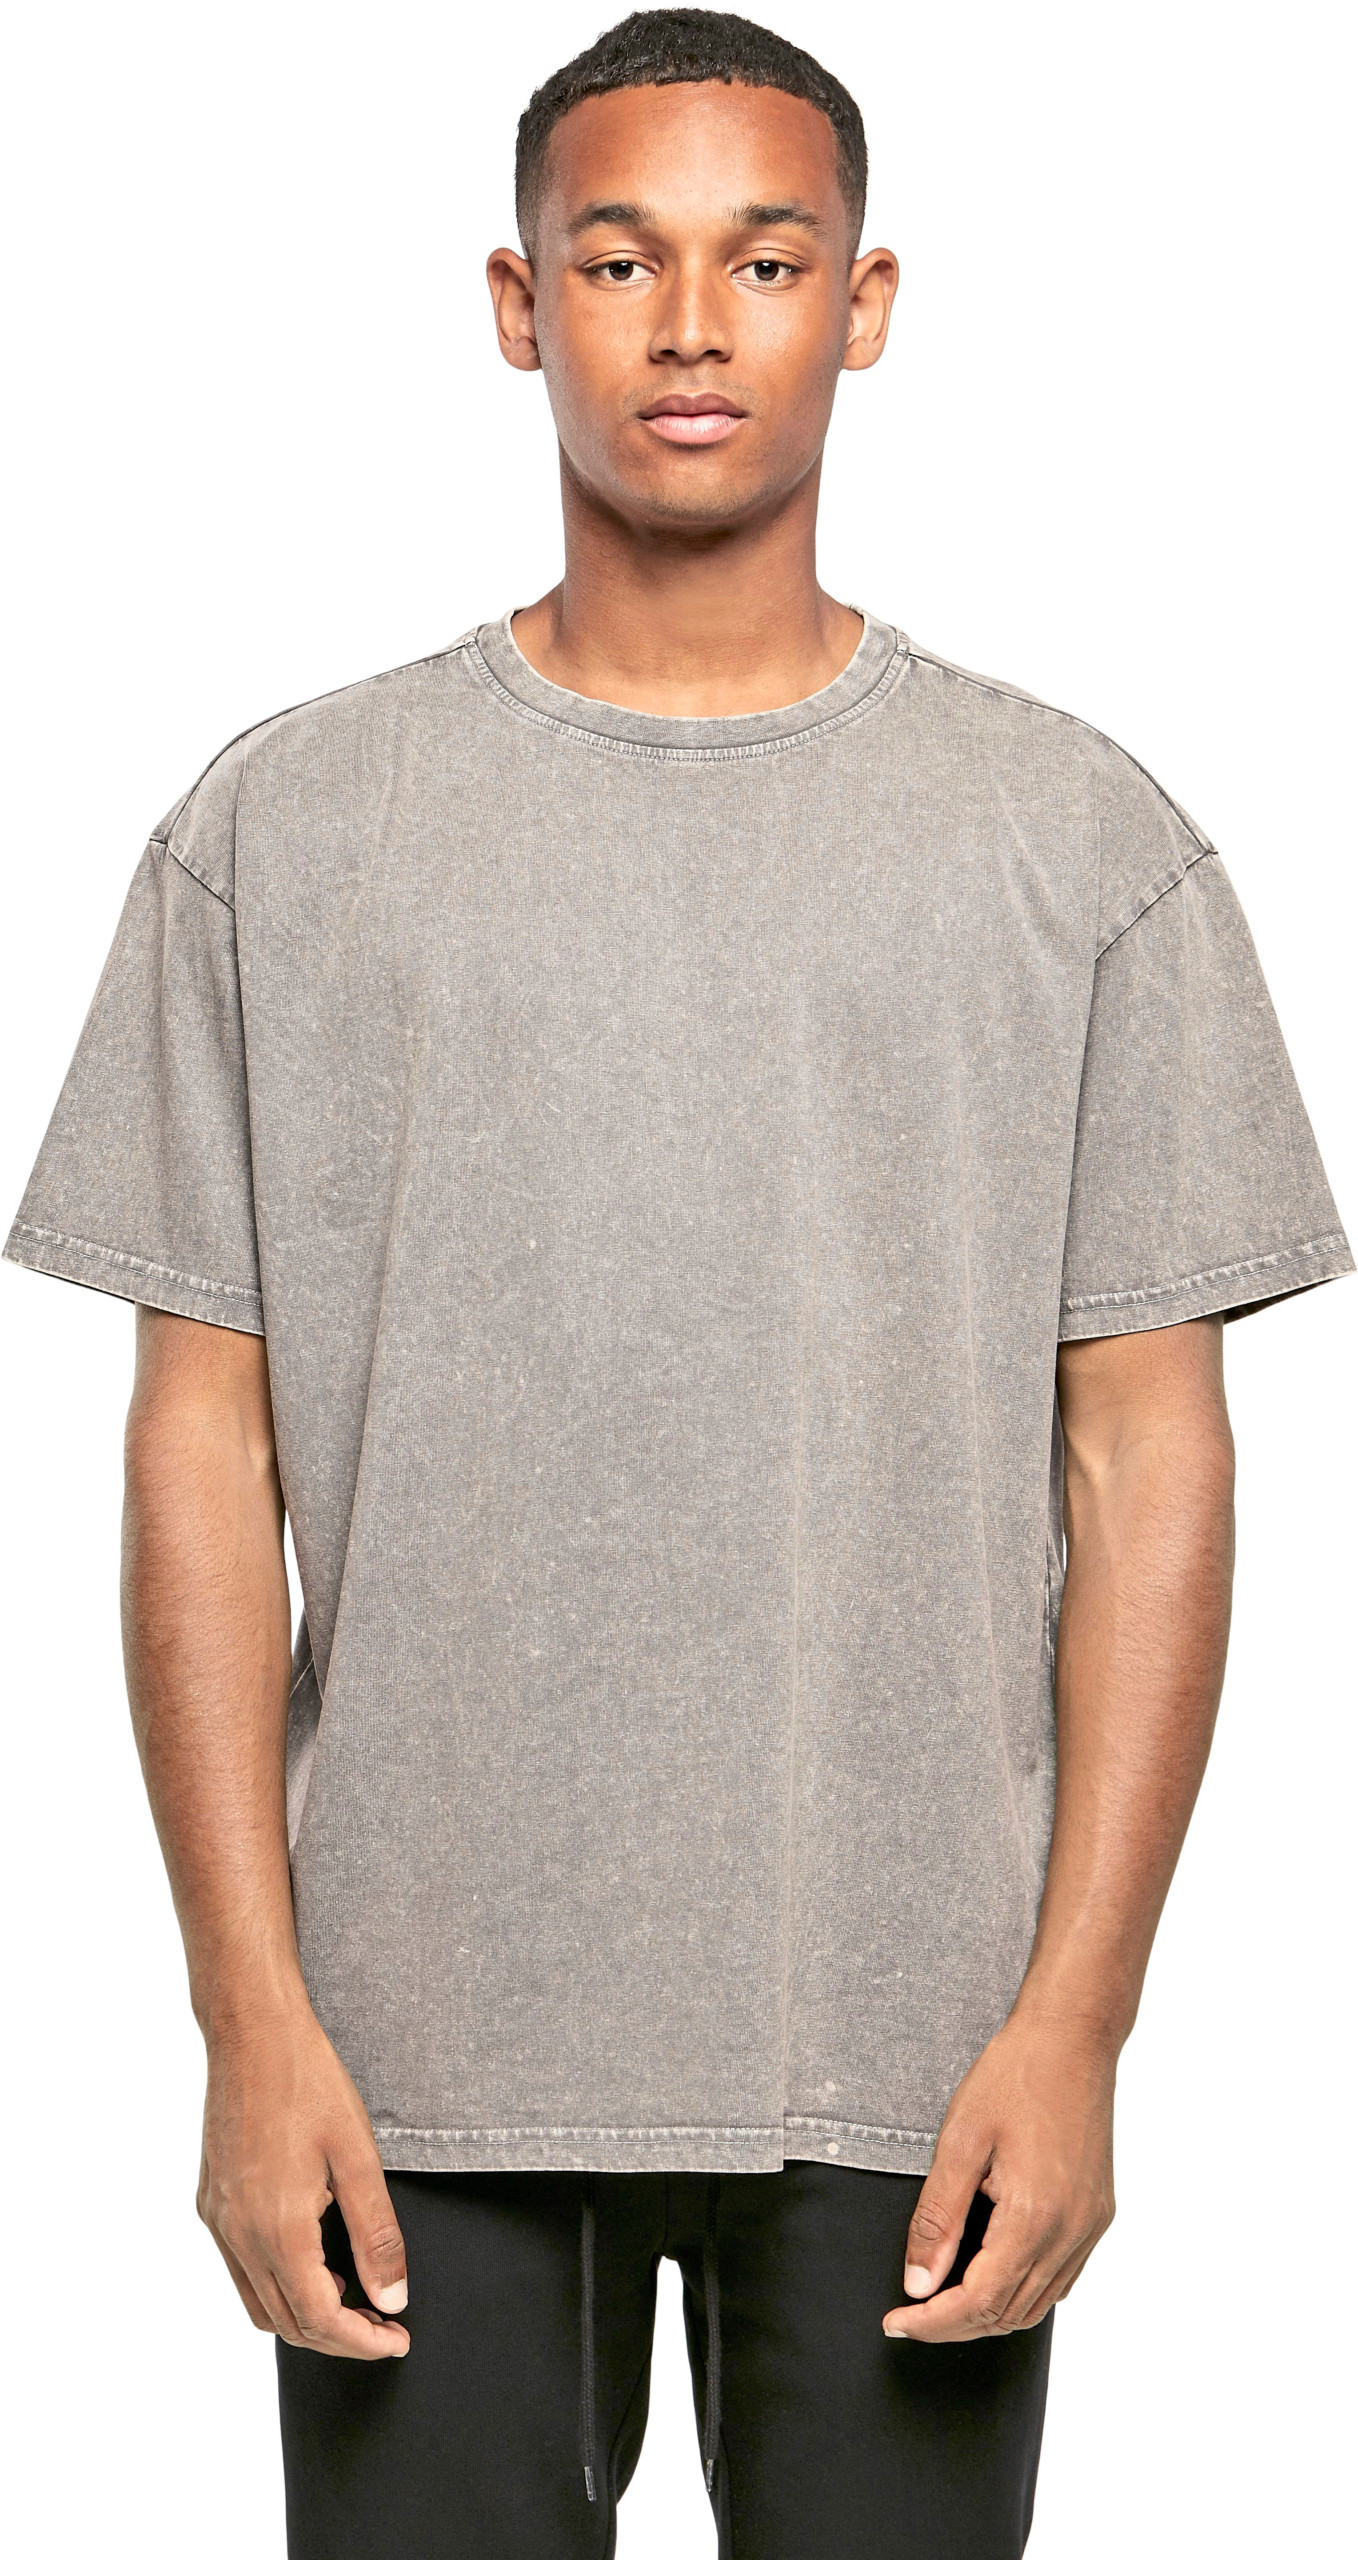 Rundhals Shirts - Build Your Brand - Acid Washed Heavy Oversize Tee - BY189